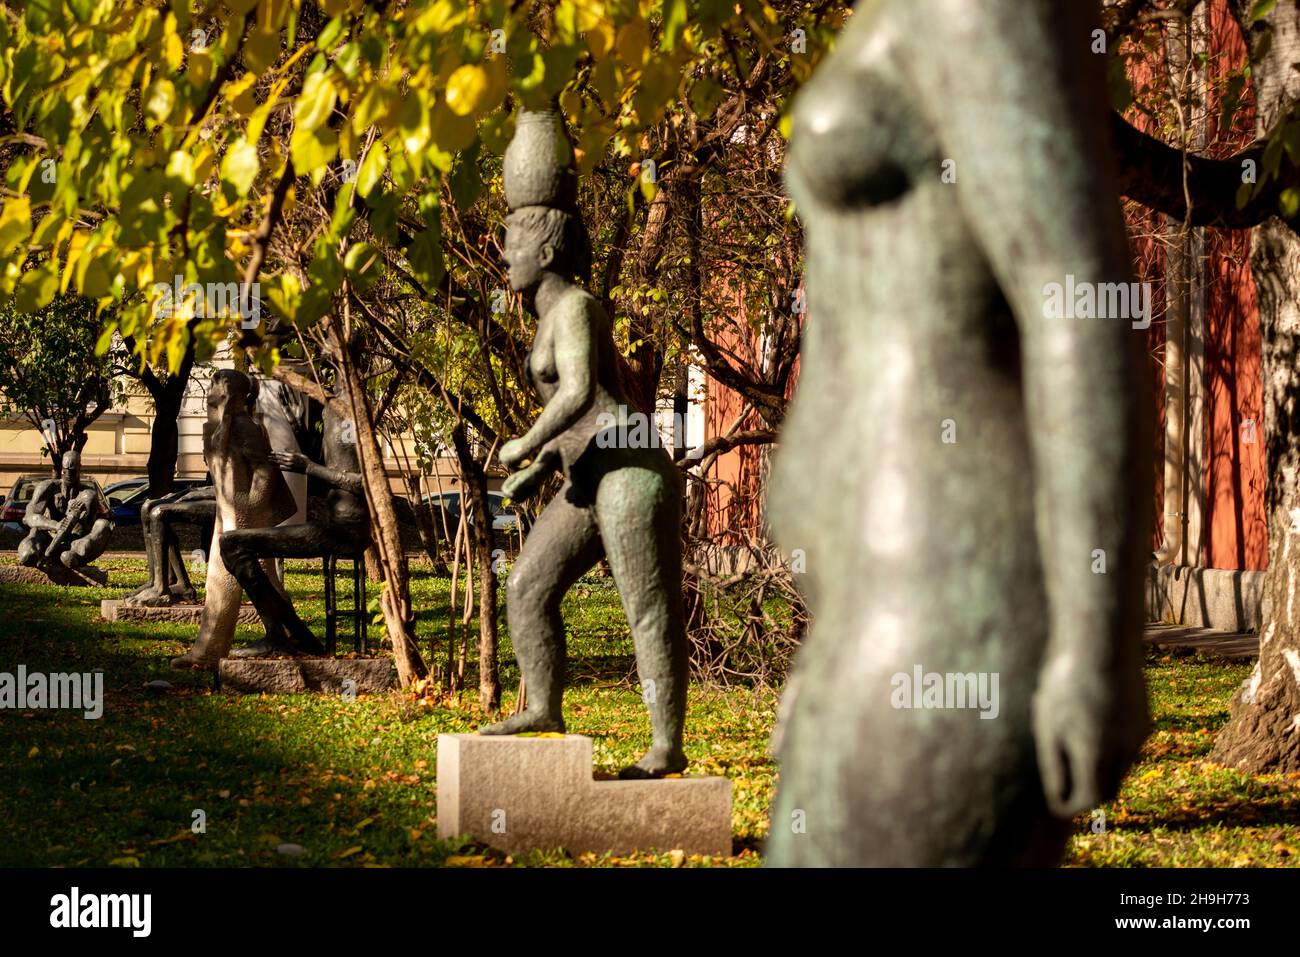 Sculptures outside the Sofia City Art Gallery museum in Sofia, Bulgaria Stock Photo